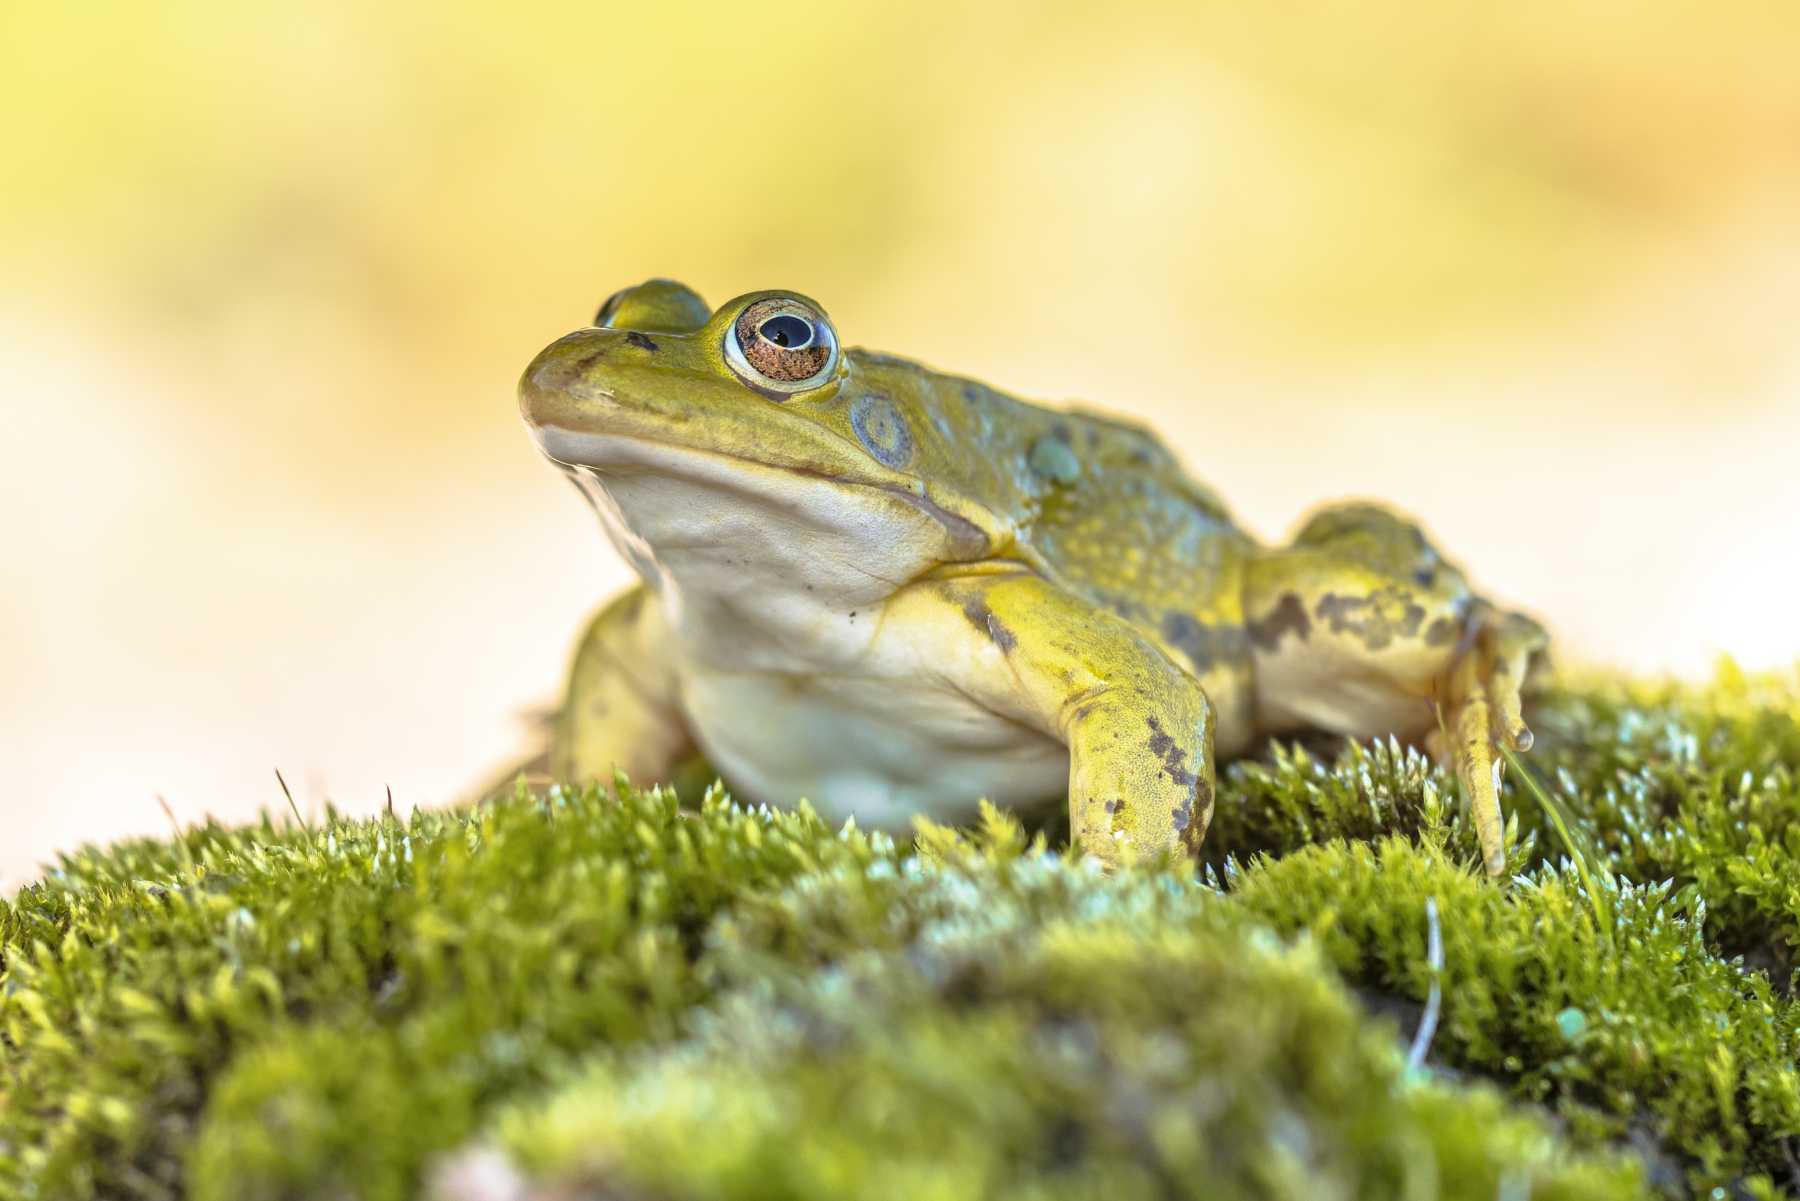 A frog in grass - what do frogs eat? what do frogs eat, frog food, do frogs eat grasshoppers, what does frogs eat, what do small frogs eat, what does a frog eat, what do frogs eat?, what do frog eat, frog diet, do frogs eat plants, do frogs eat grass, do frogs eat worms